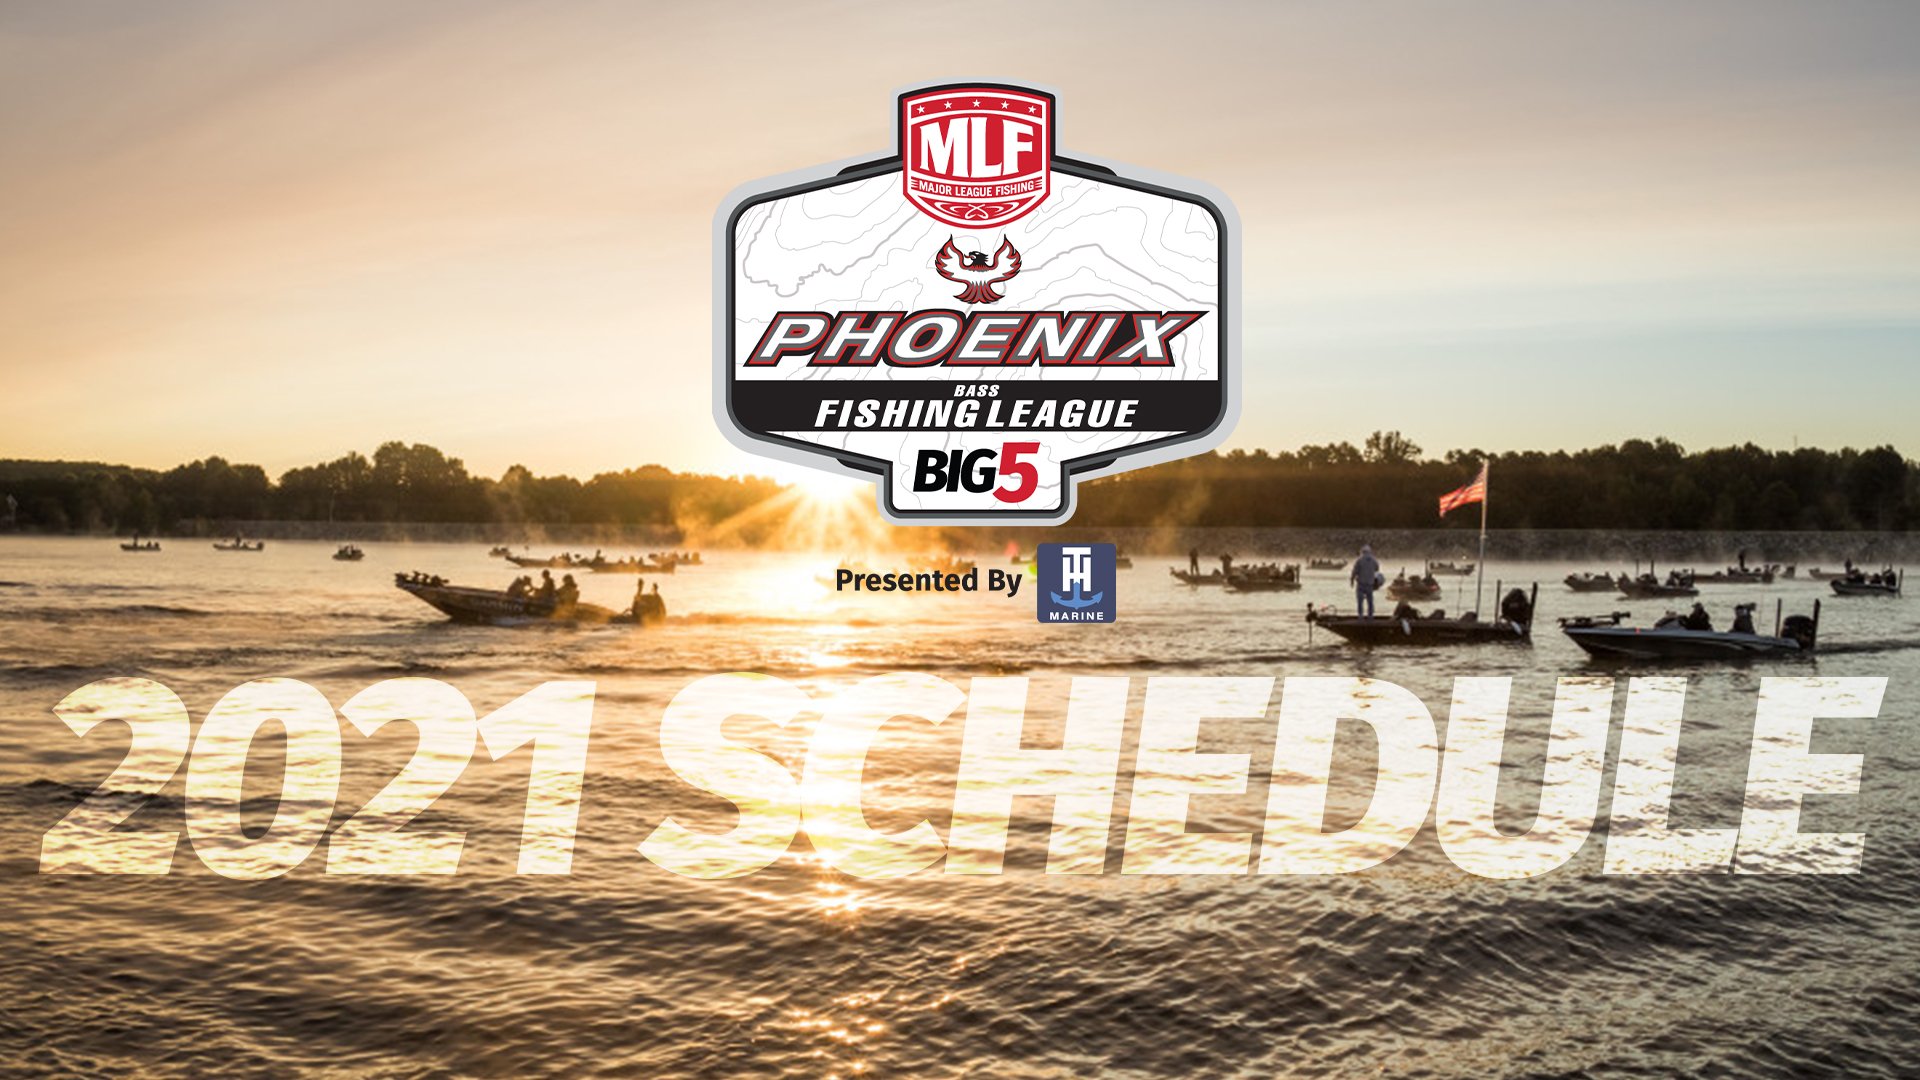 MLF Announces 2021 Phoenix Bass Fishing League presented by T-H Marine  Schedule, Entry Dates and Advancement Opportunities – Anglers Channel